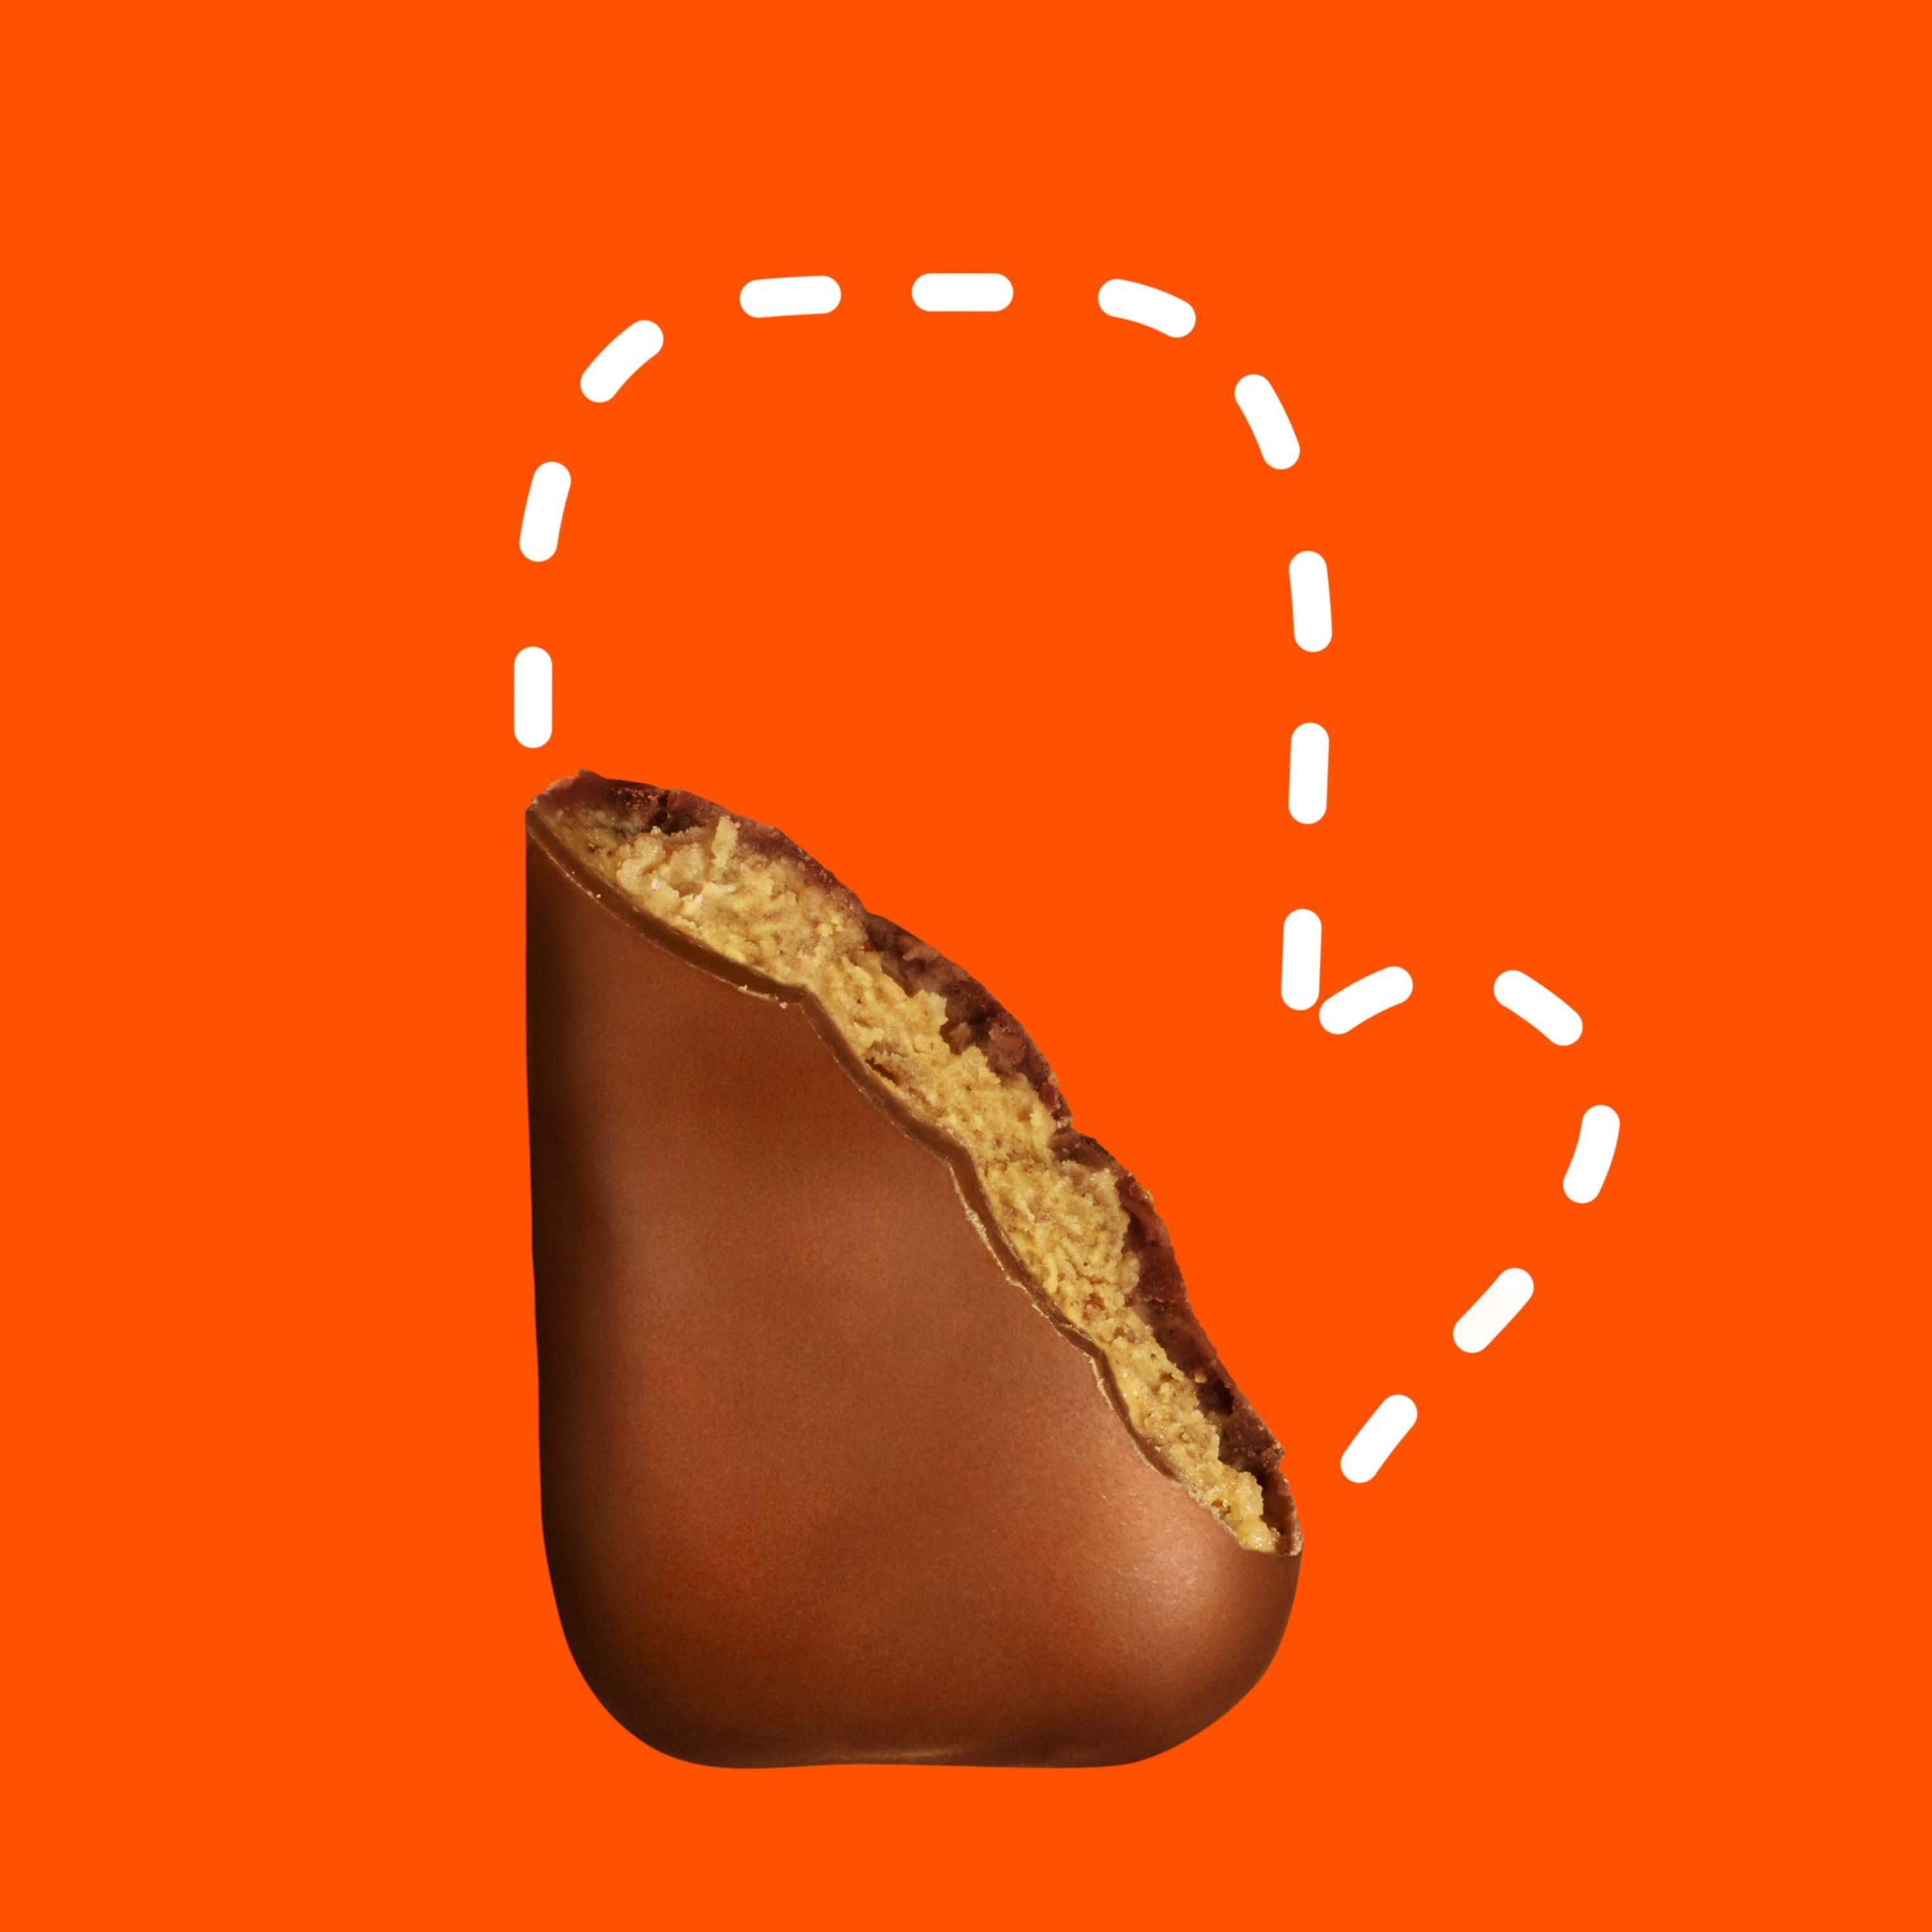 REESES MYSTERY SHAPES - image 2 of 5